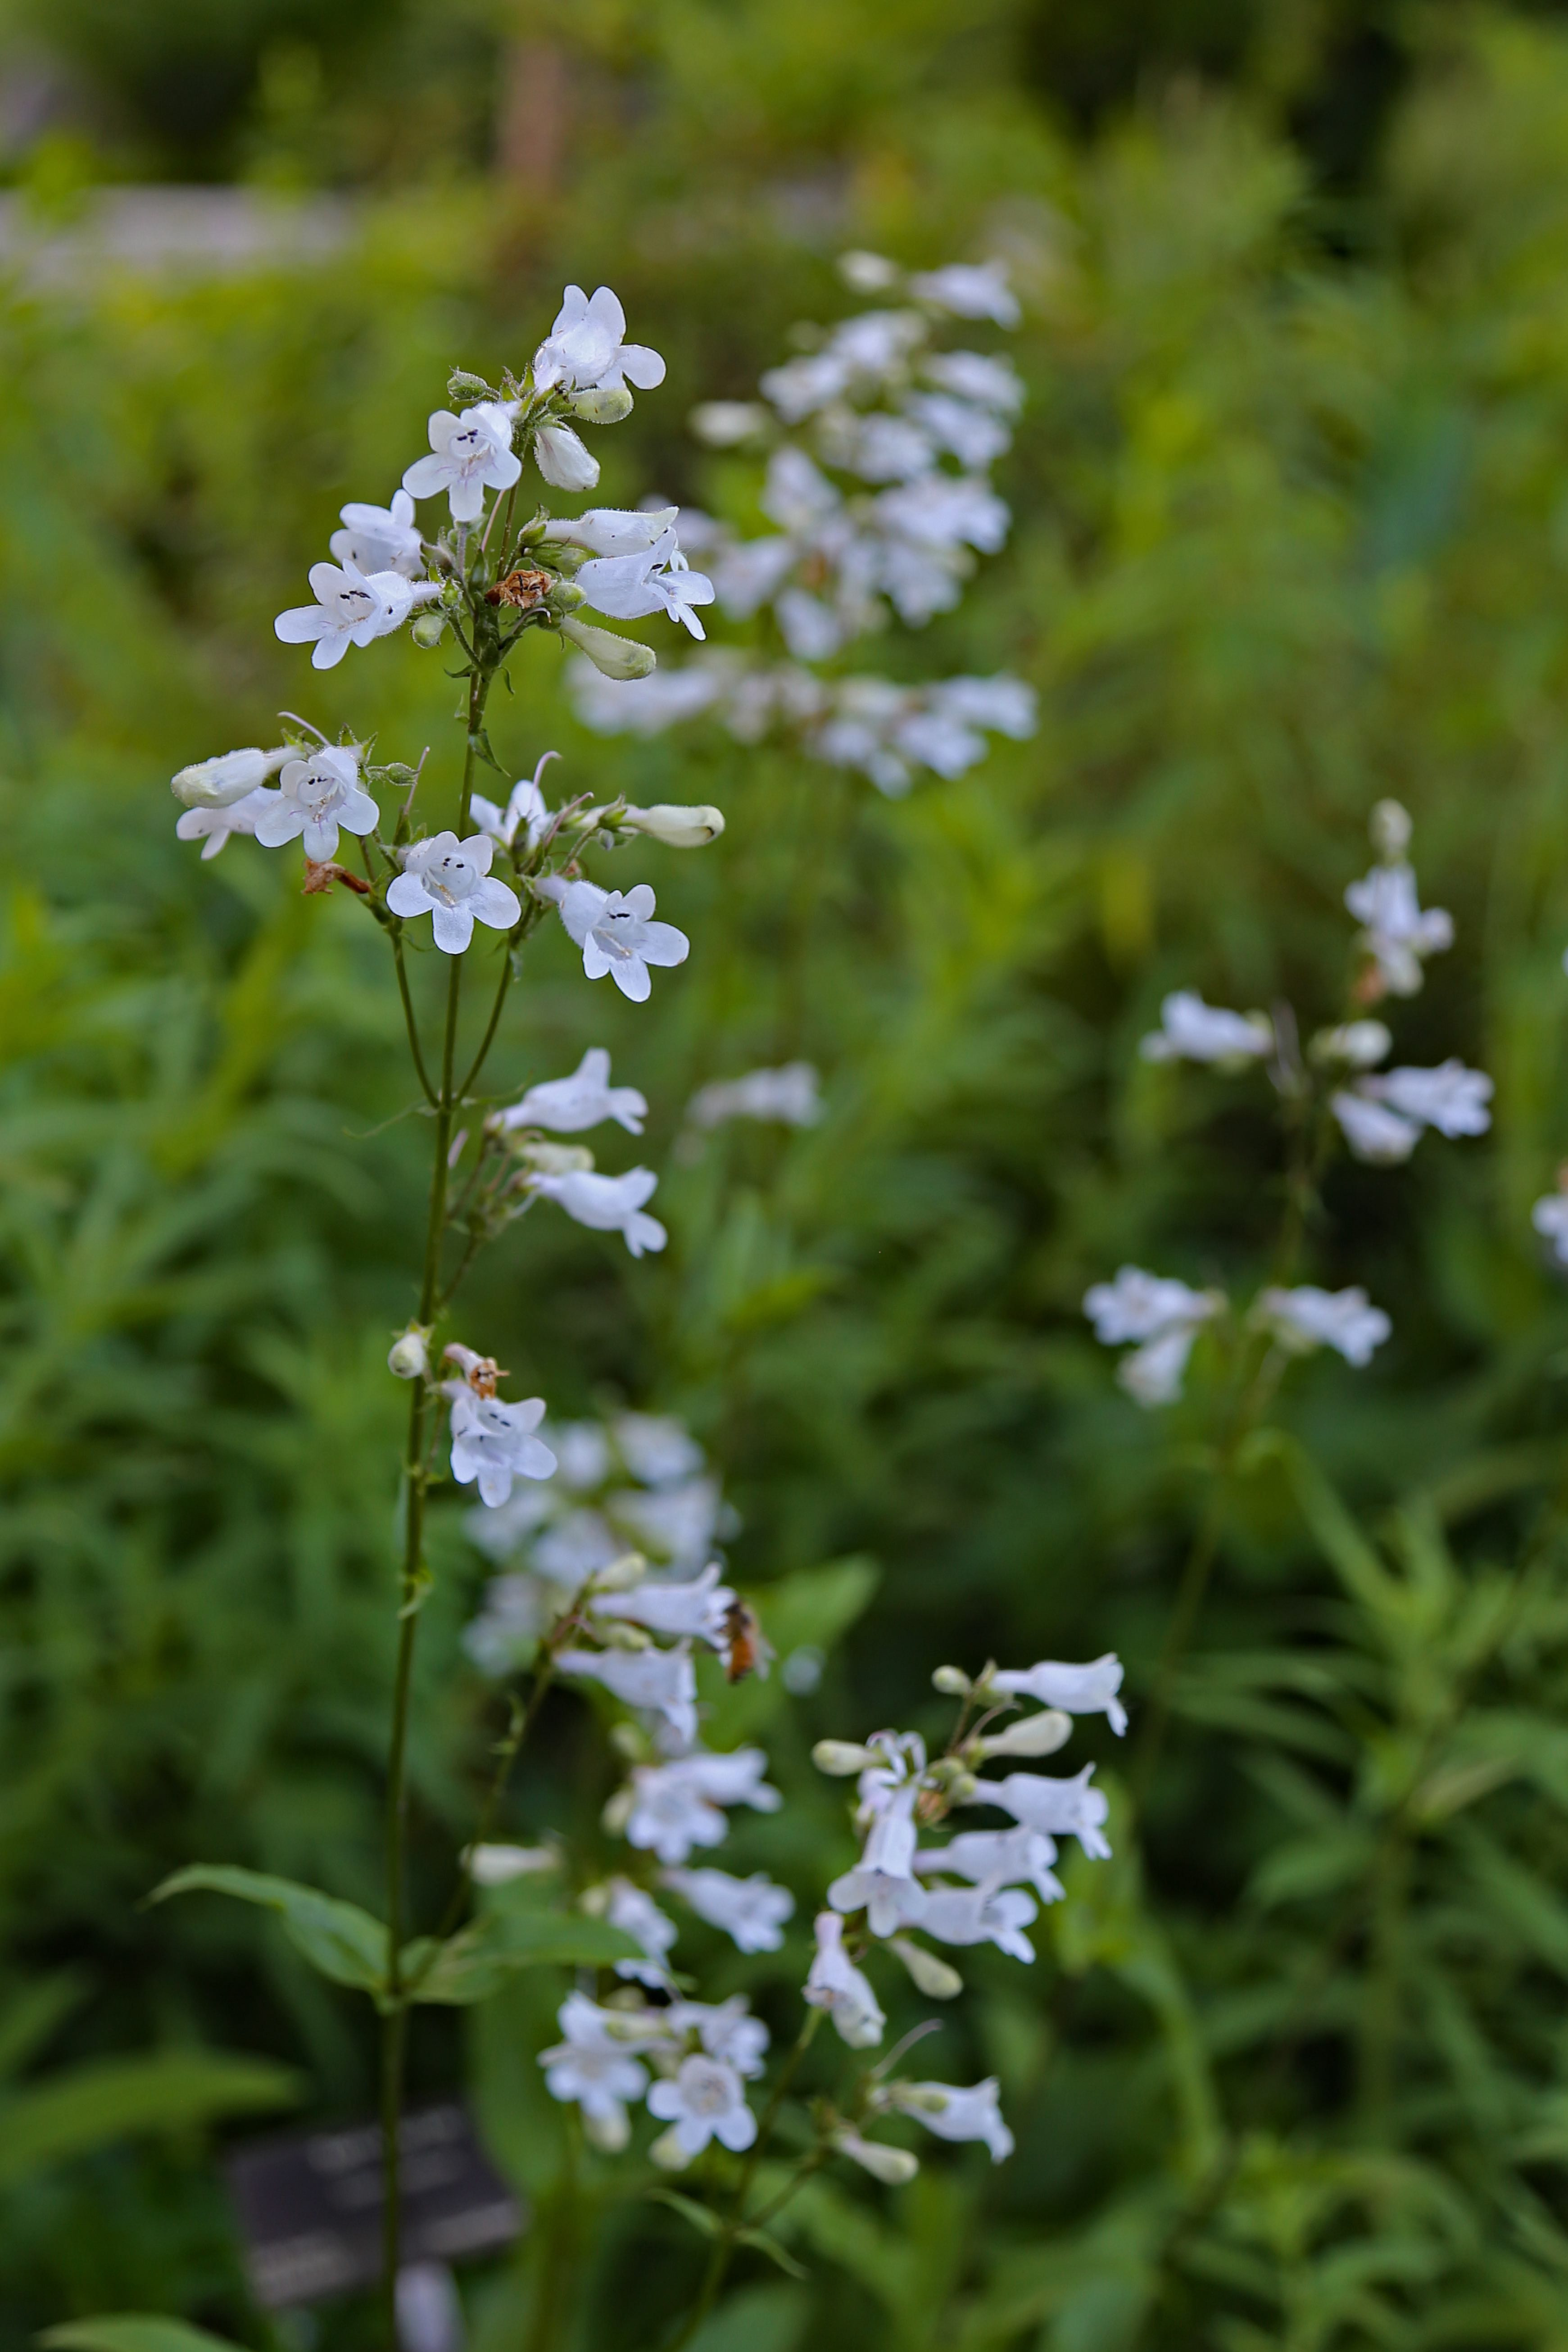 The Scientific Name is Penstemon digitalis. You will likely hear them called Foxglove Beardtongue, Tall White Beardtongue. This picture shows the Tall, slender Penstemon digitalis at the North Carolina Arboretum. of Penstemon digitalis